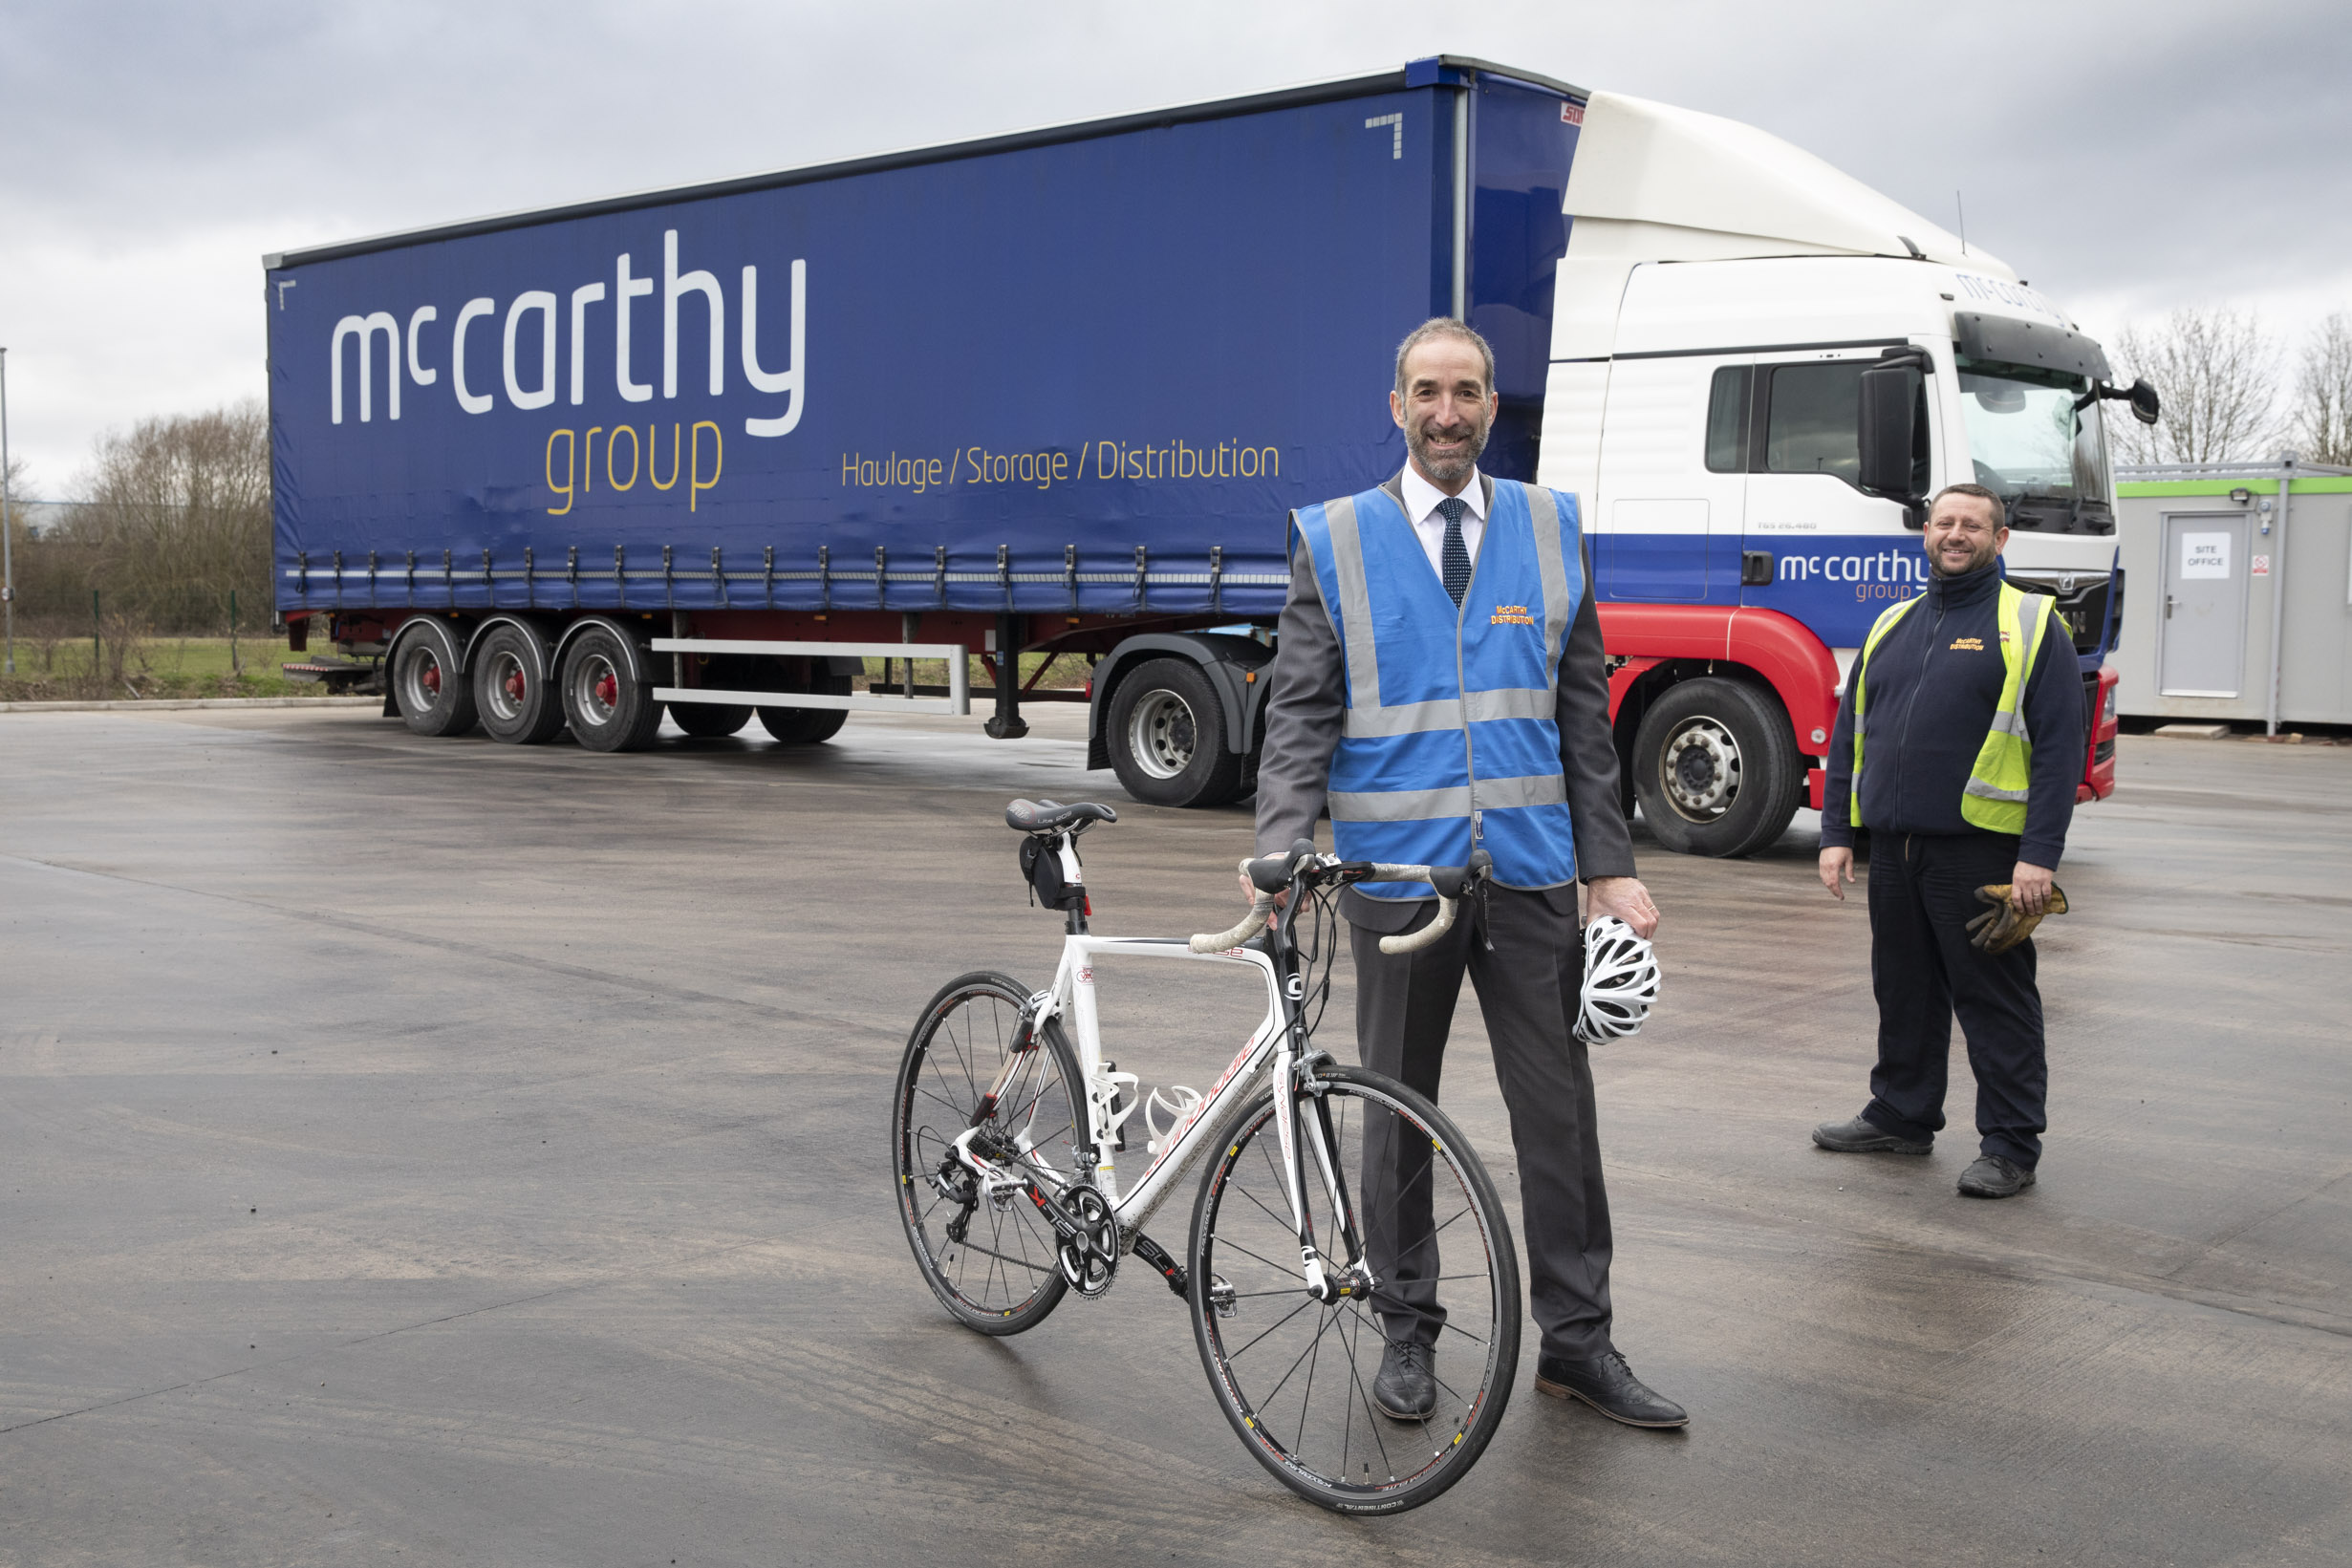 £75,000 safety camera investment brings ‘peace of mind’ for drivers at Wrexham distribution firm